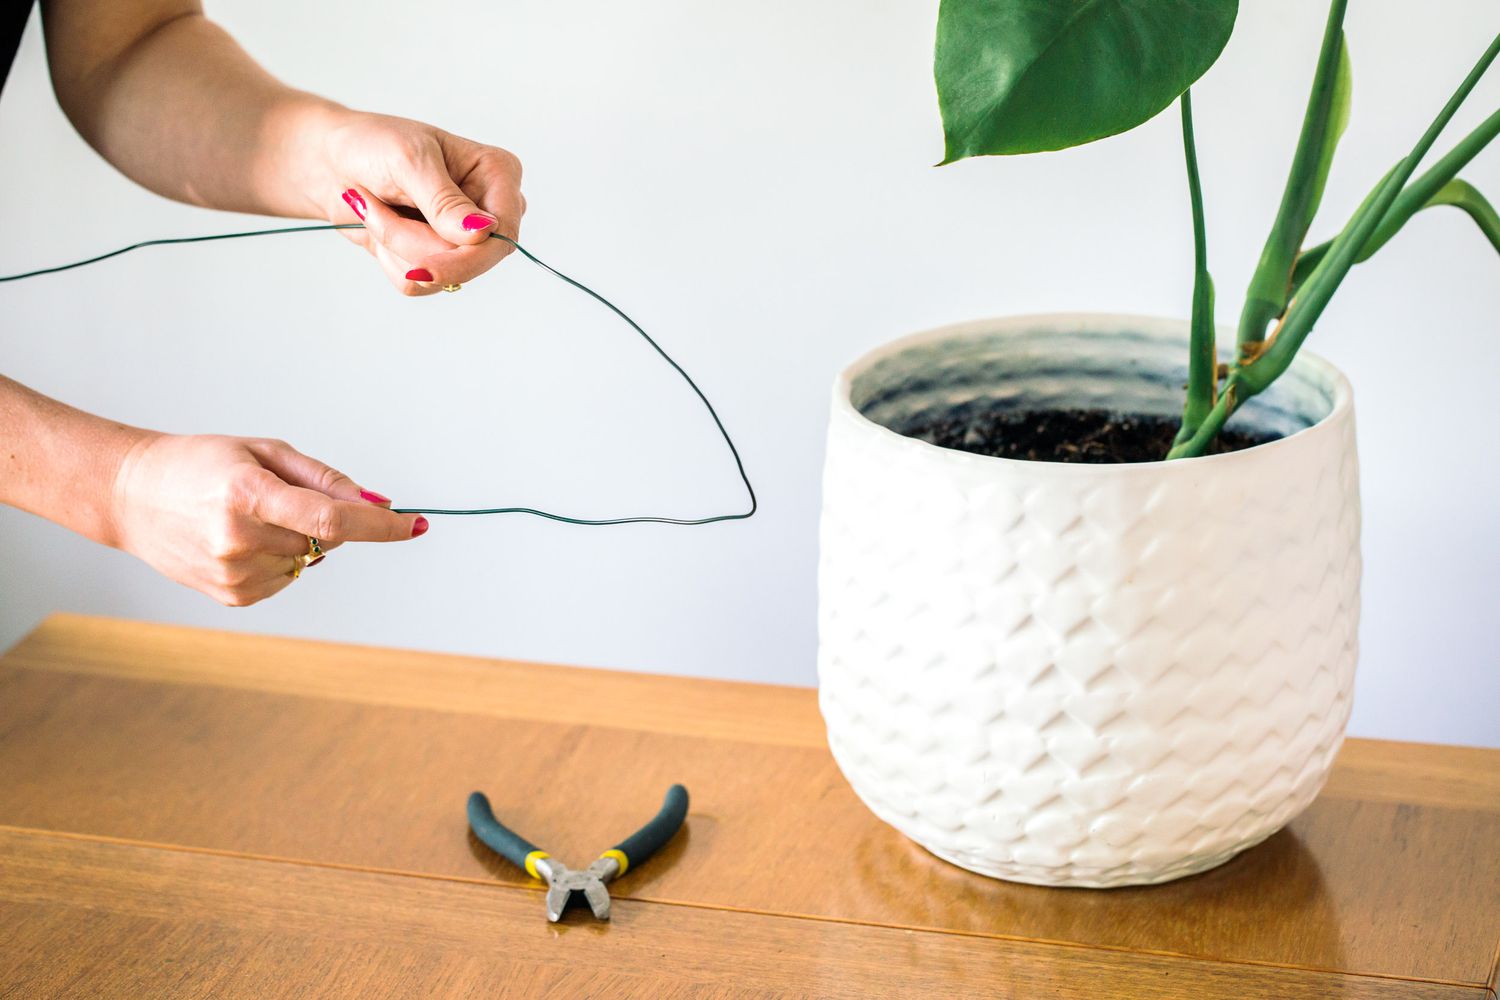 Rigid wire shaped as hoop with pliers next to houseplant